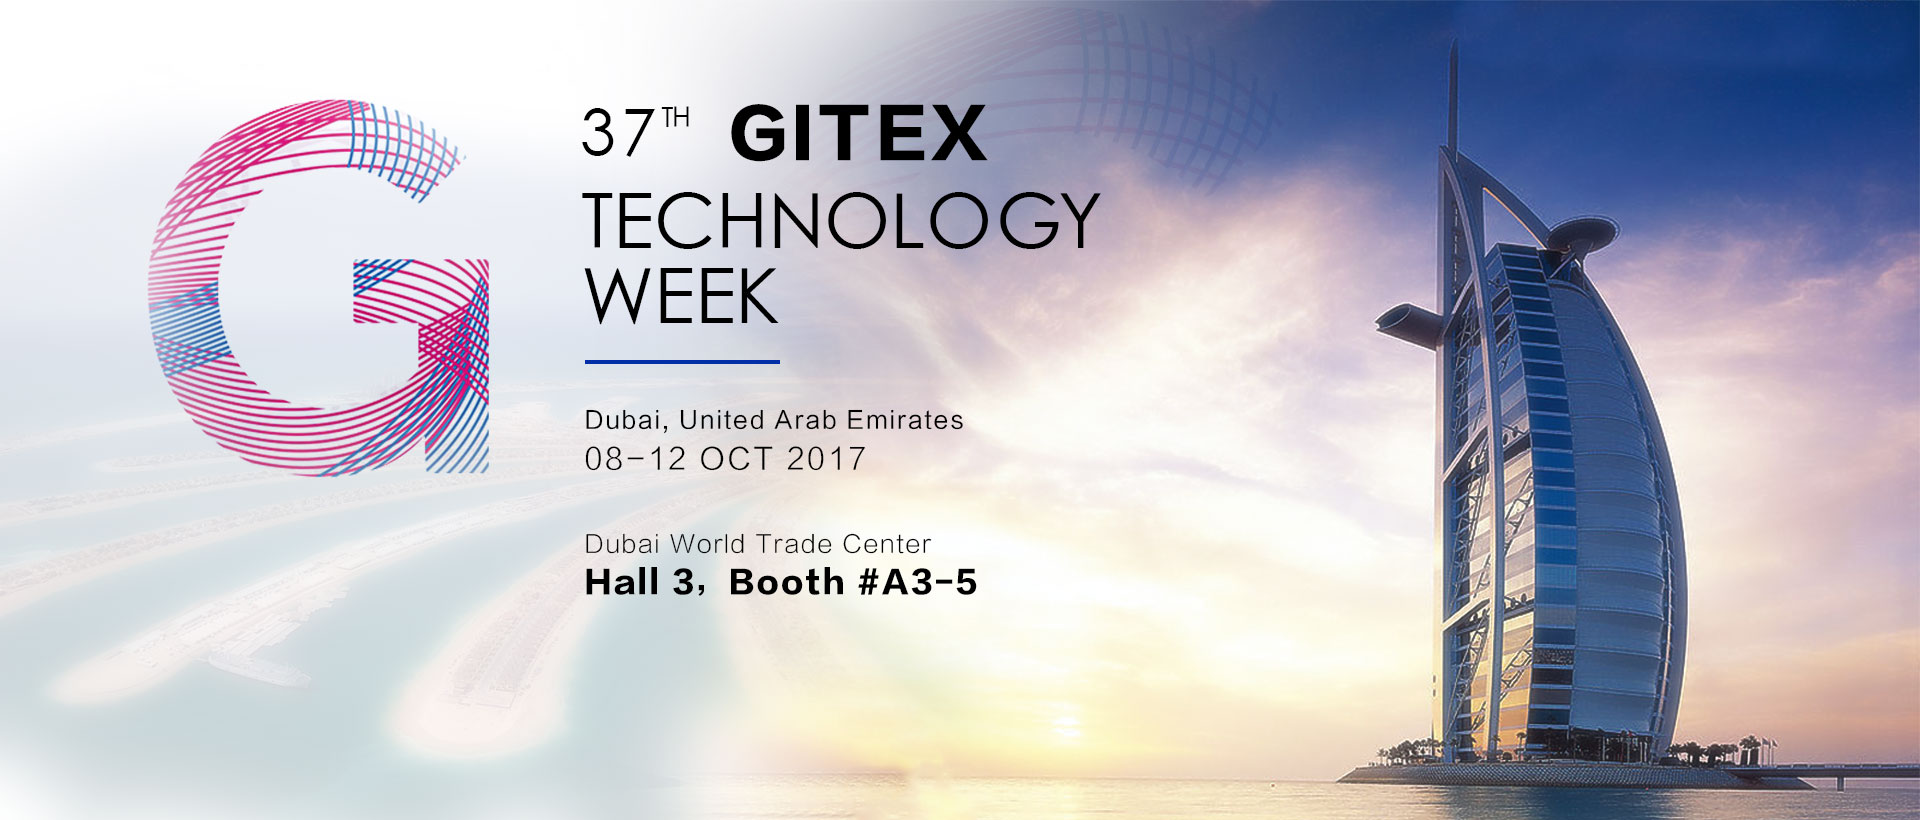 iDPRT invites you to join Gitex Exhibition 2017